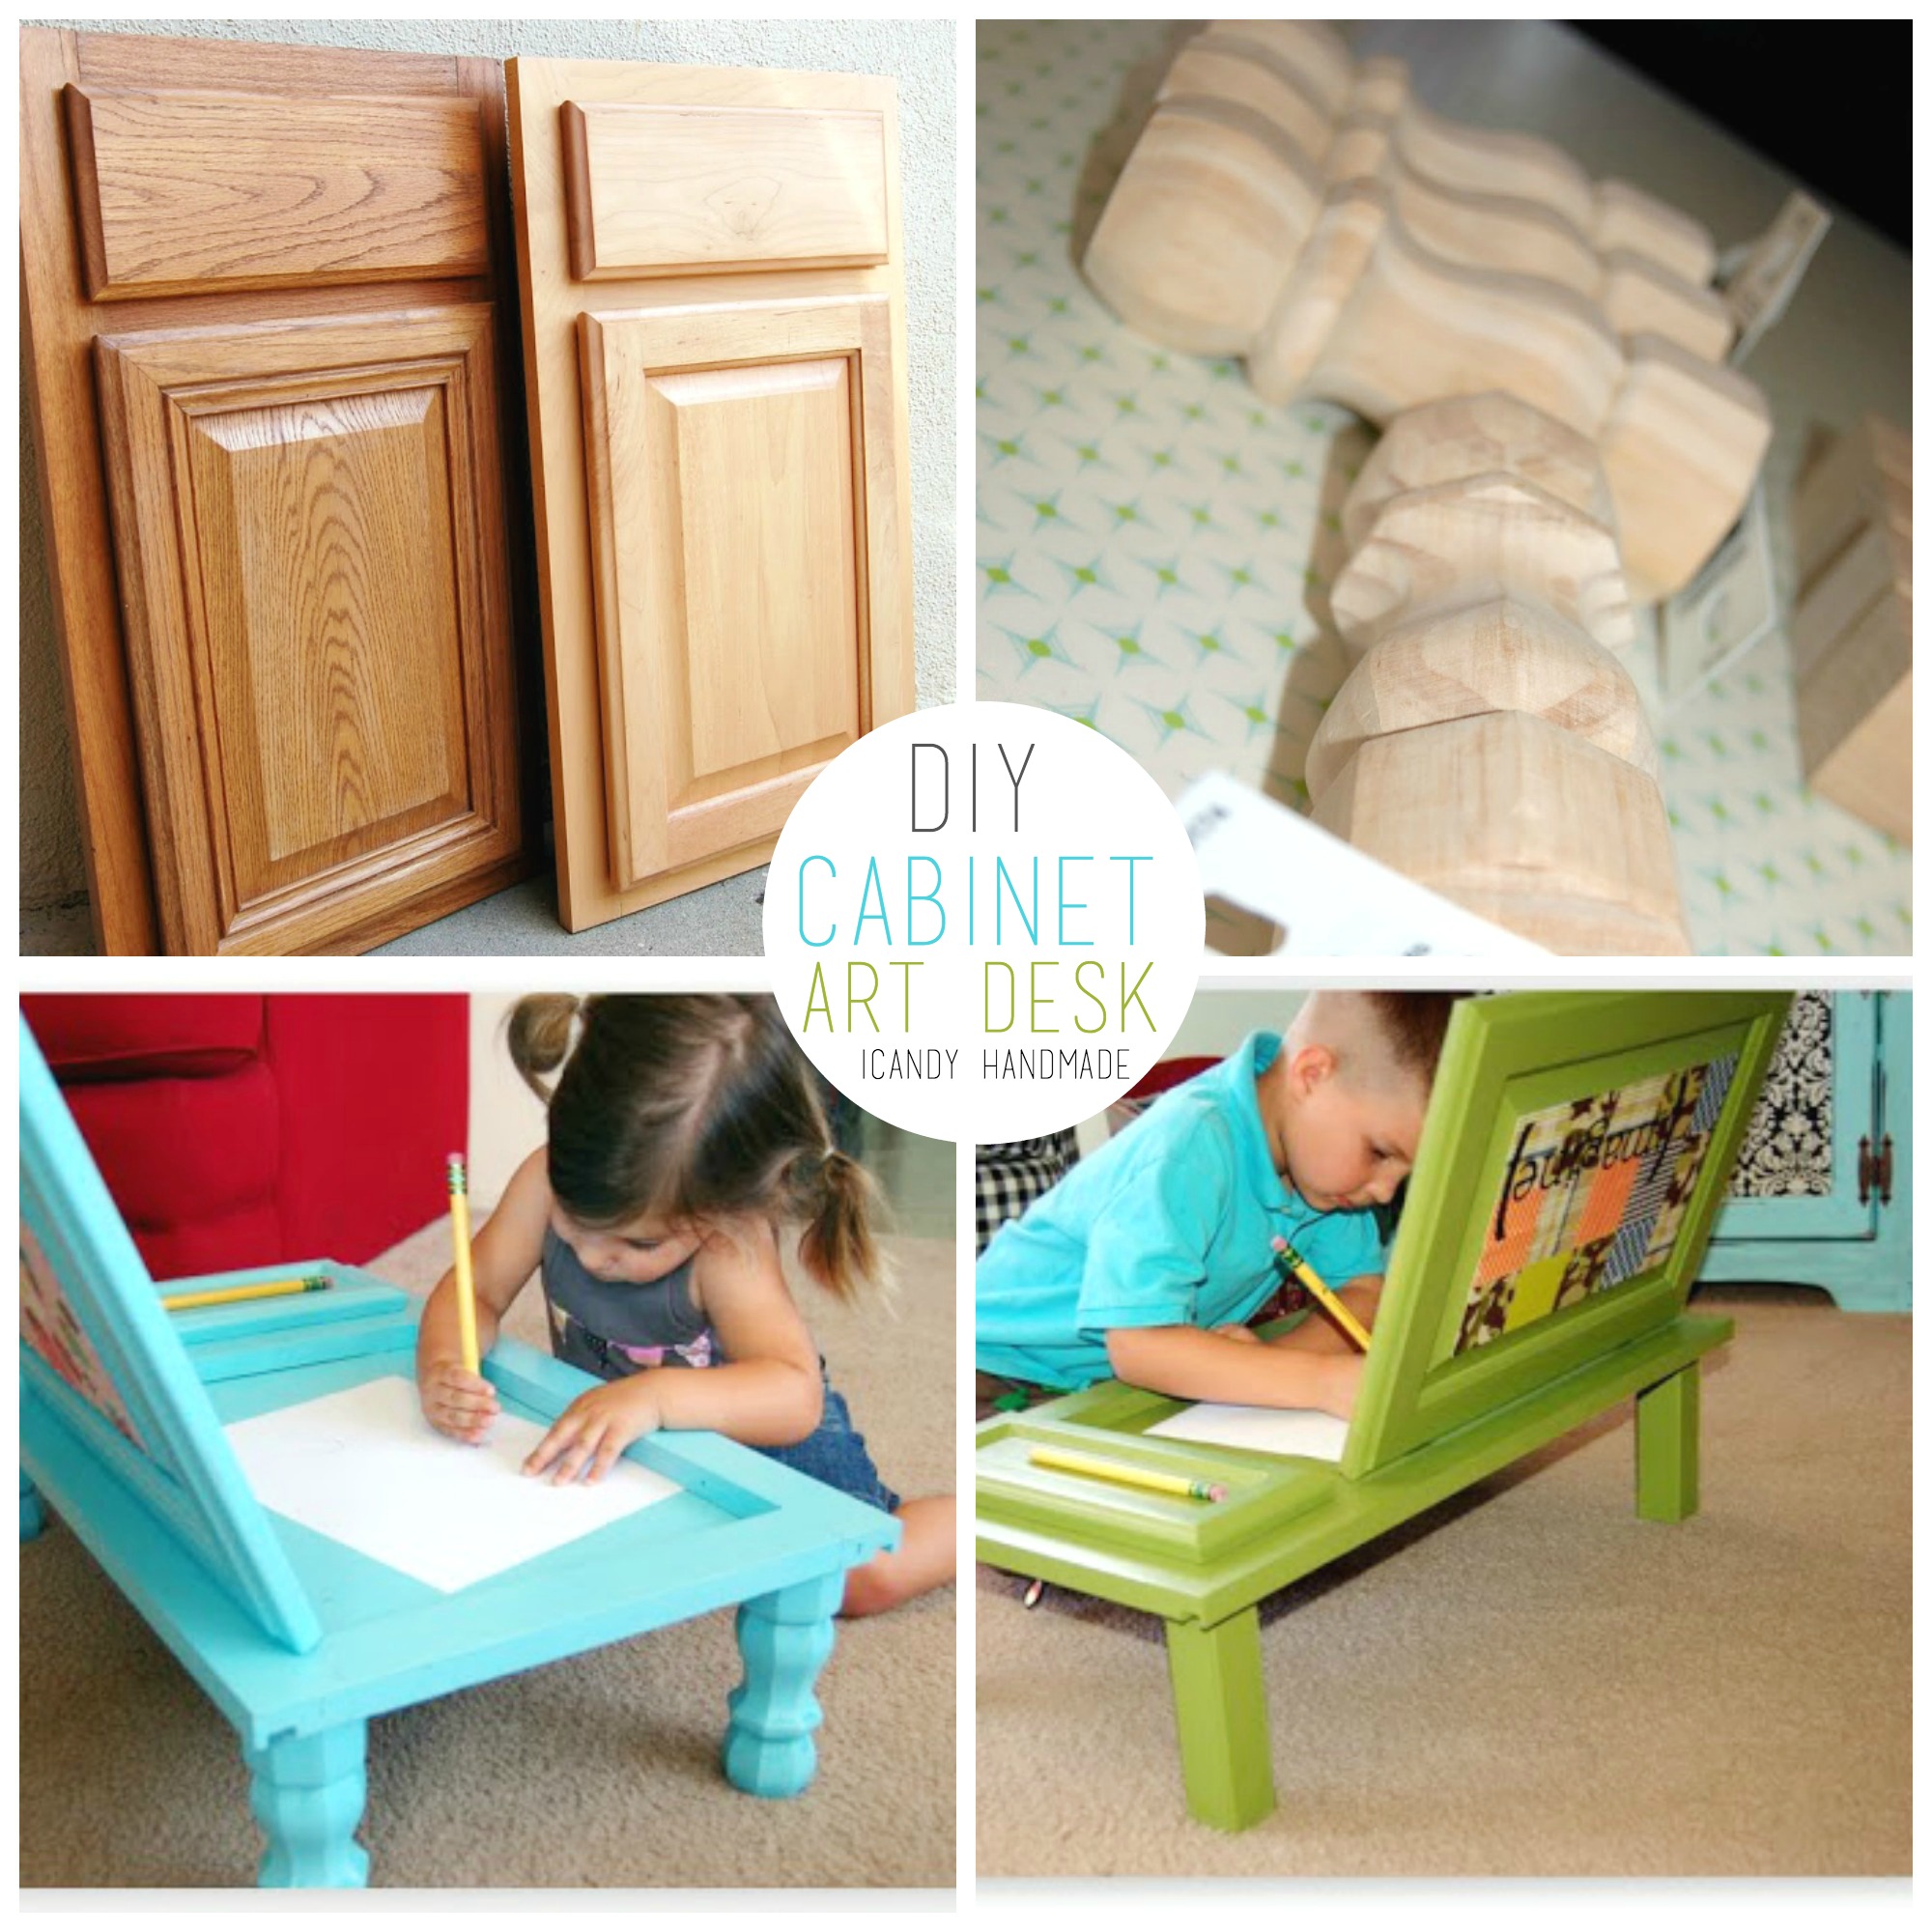 15 Awesome Diy Projects You Can Craft Using Old Cabinet Doors